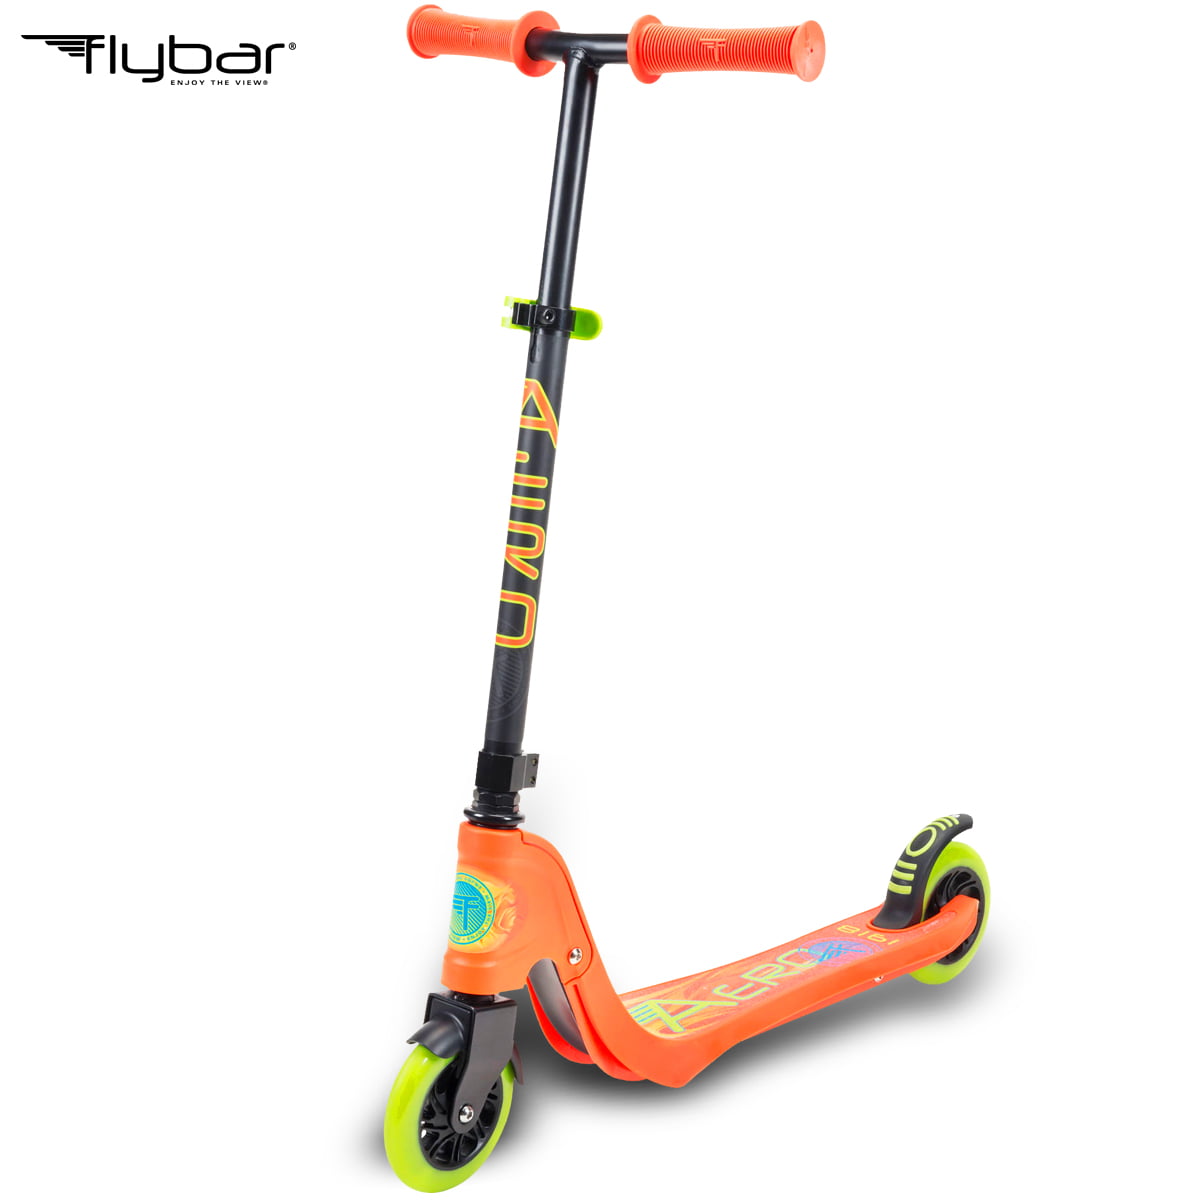 Flybar Aero Micro Kick Scooter for Kids Pro Design with 2 Electric LED Wheels, 